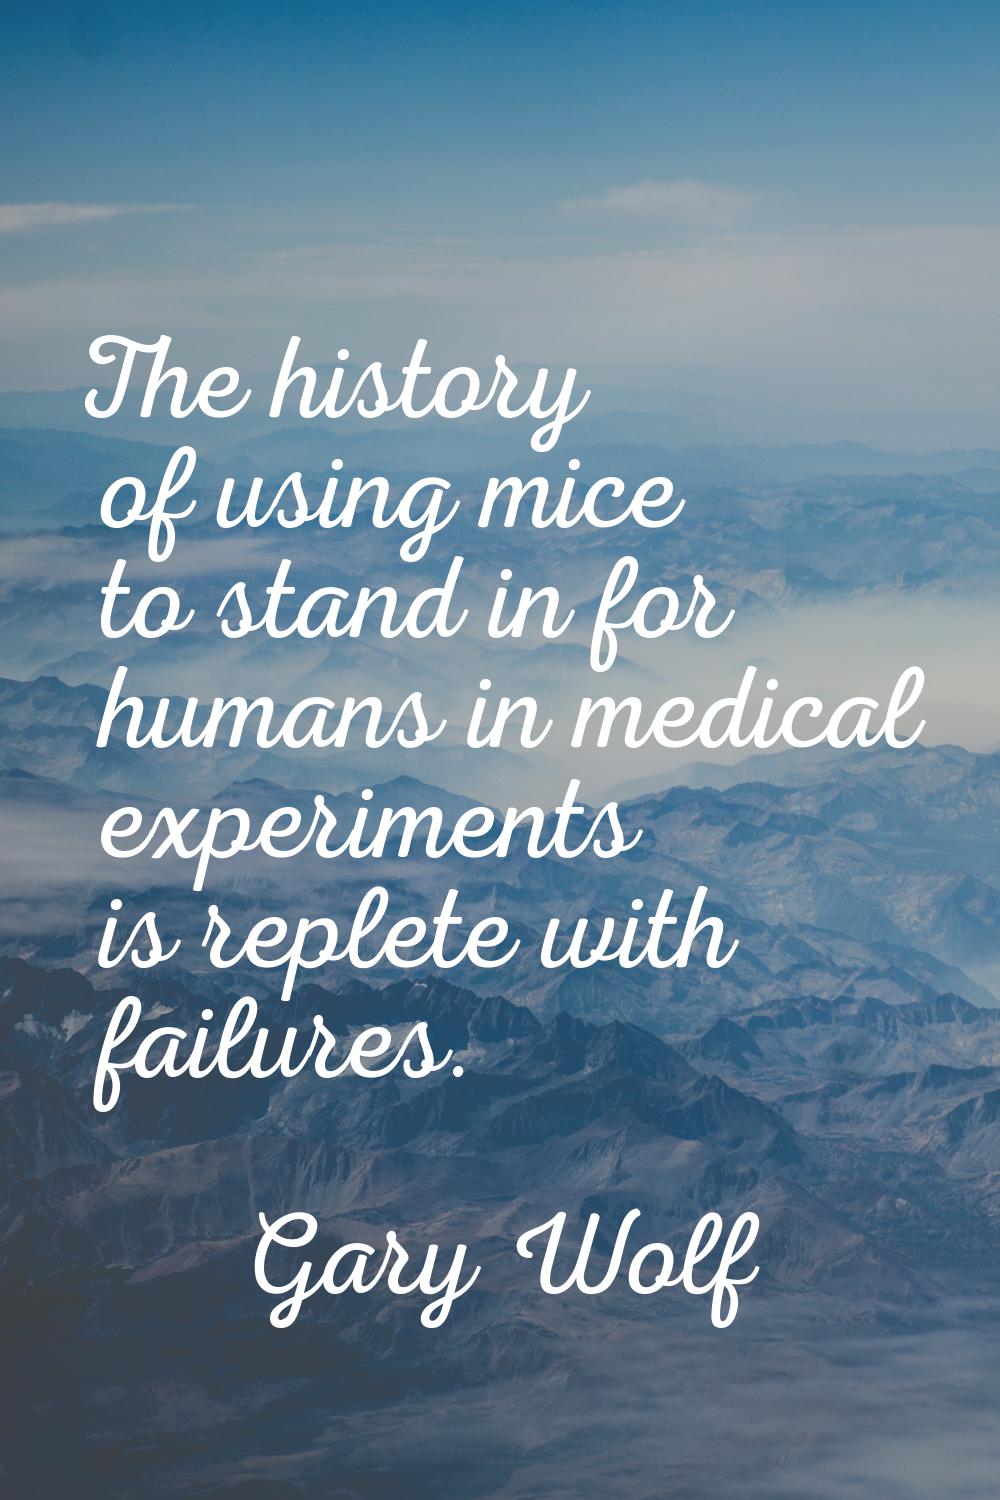 The history of using mice to stand in for humans in medical experiments is replete with failures.